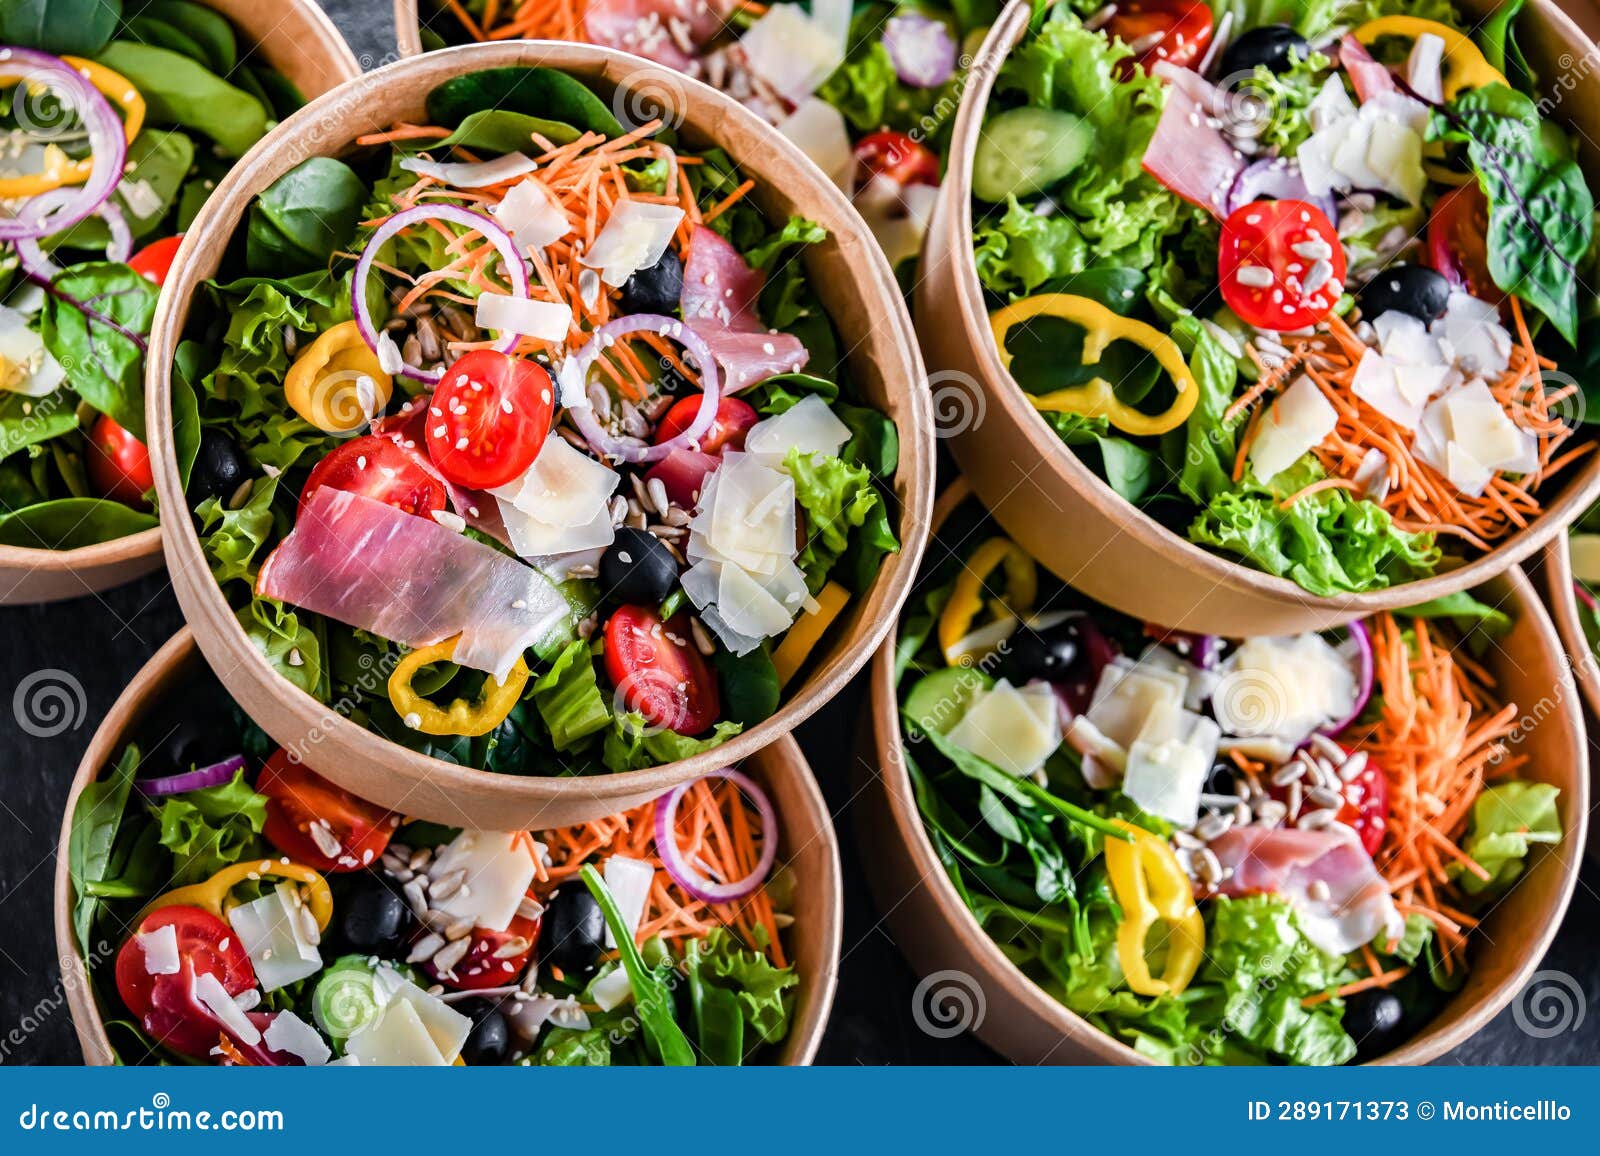 Salad Box Ready To Eat For Vegetarian And Take Away Stock Photo, Picture  and Royalty Free Image. Image 96800469.